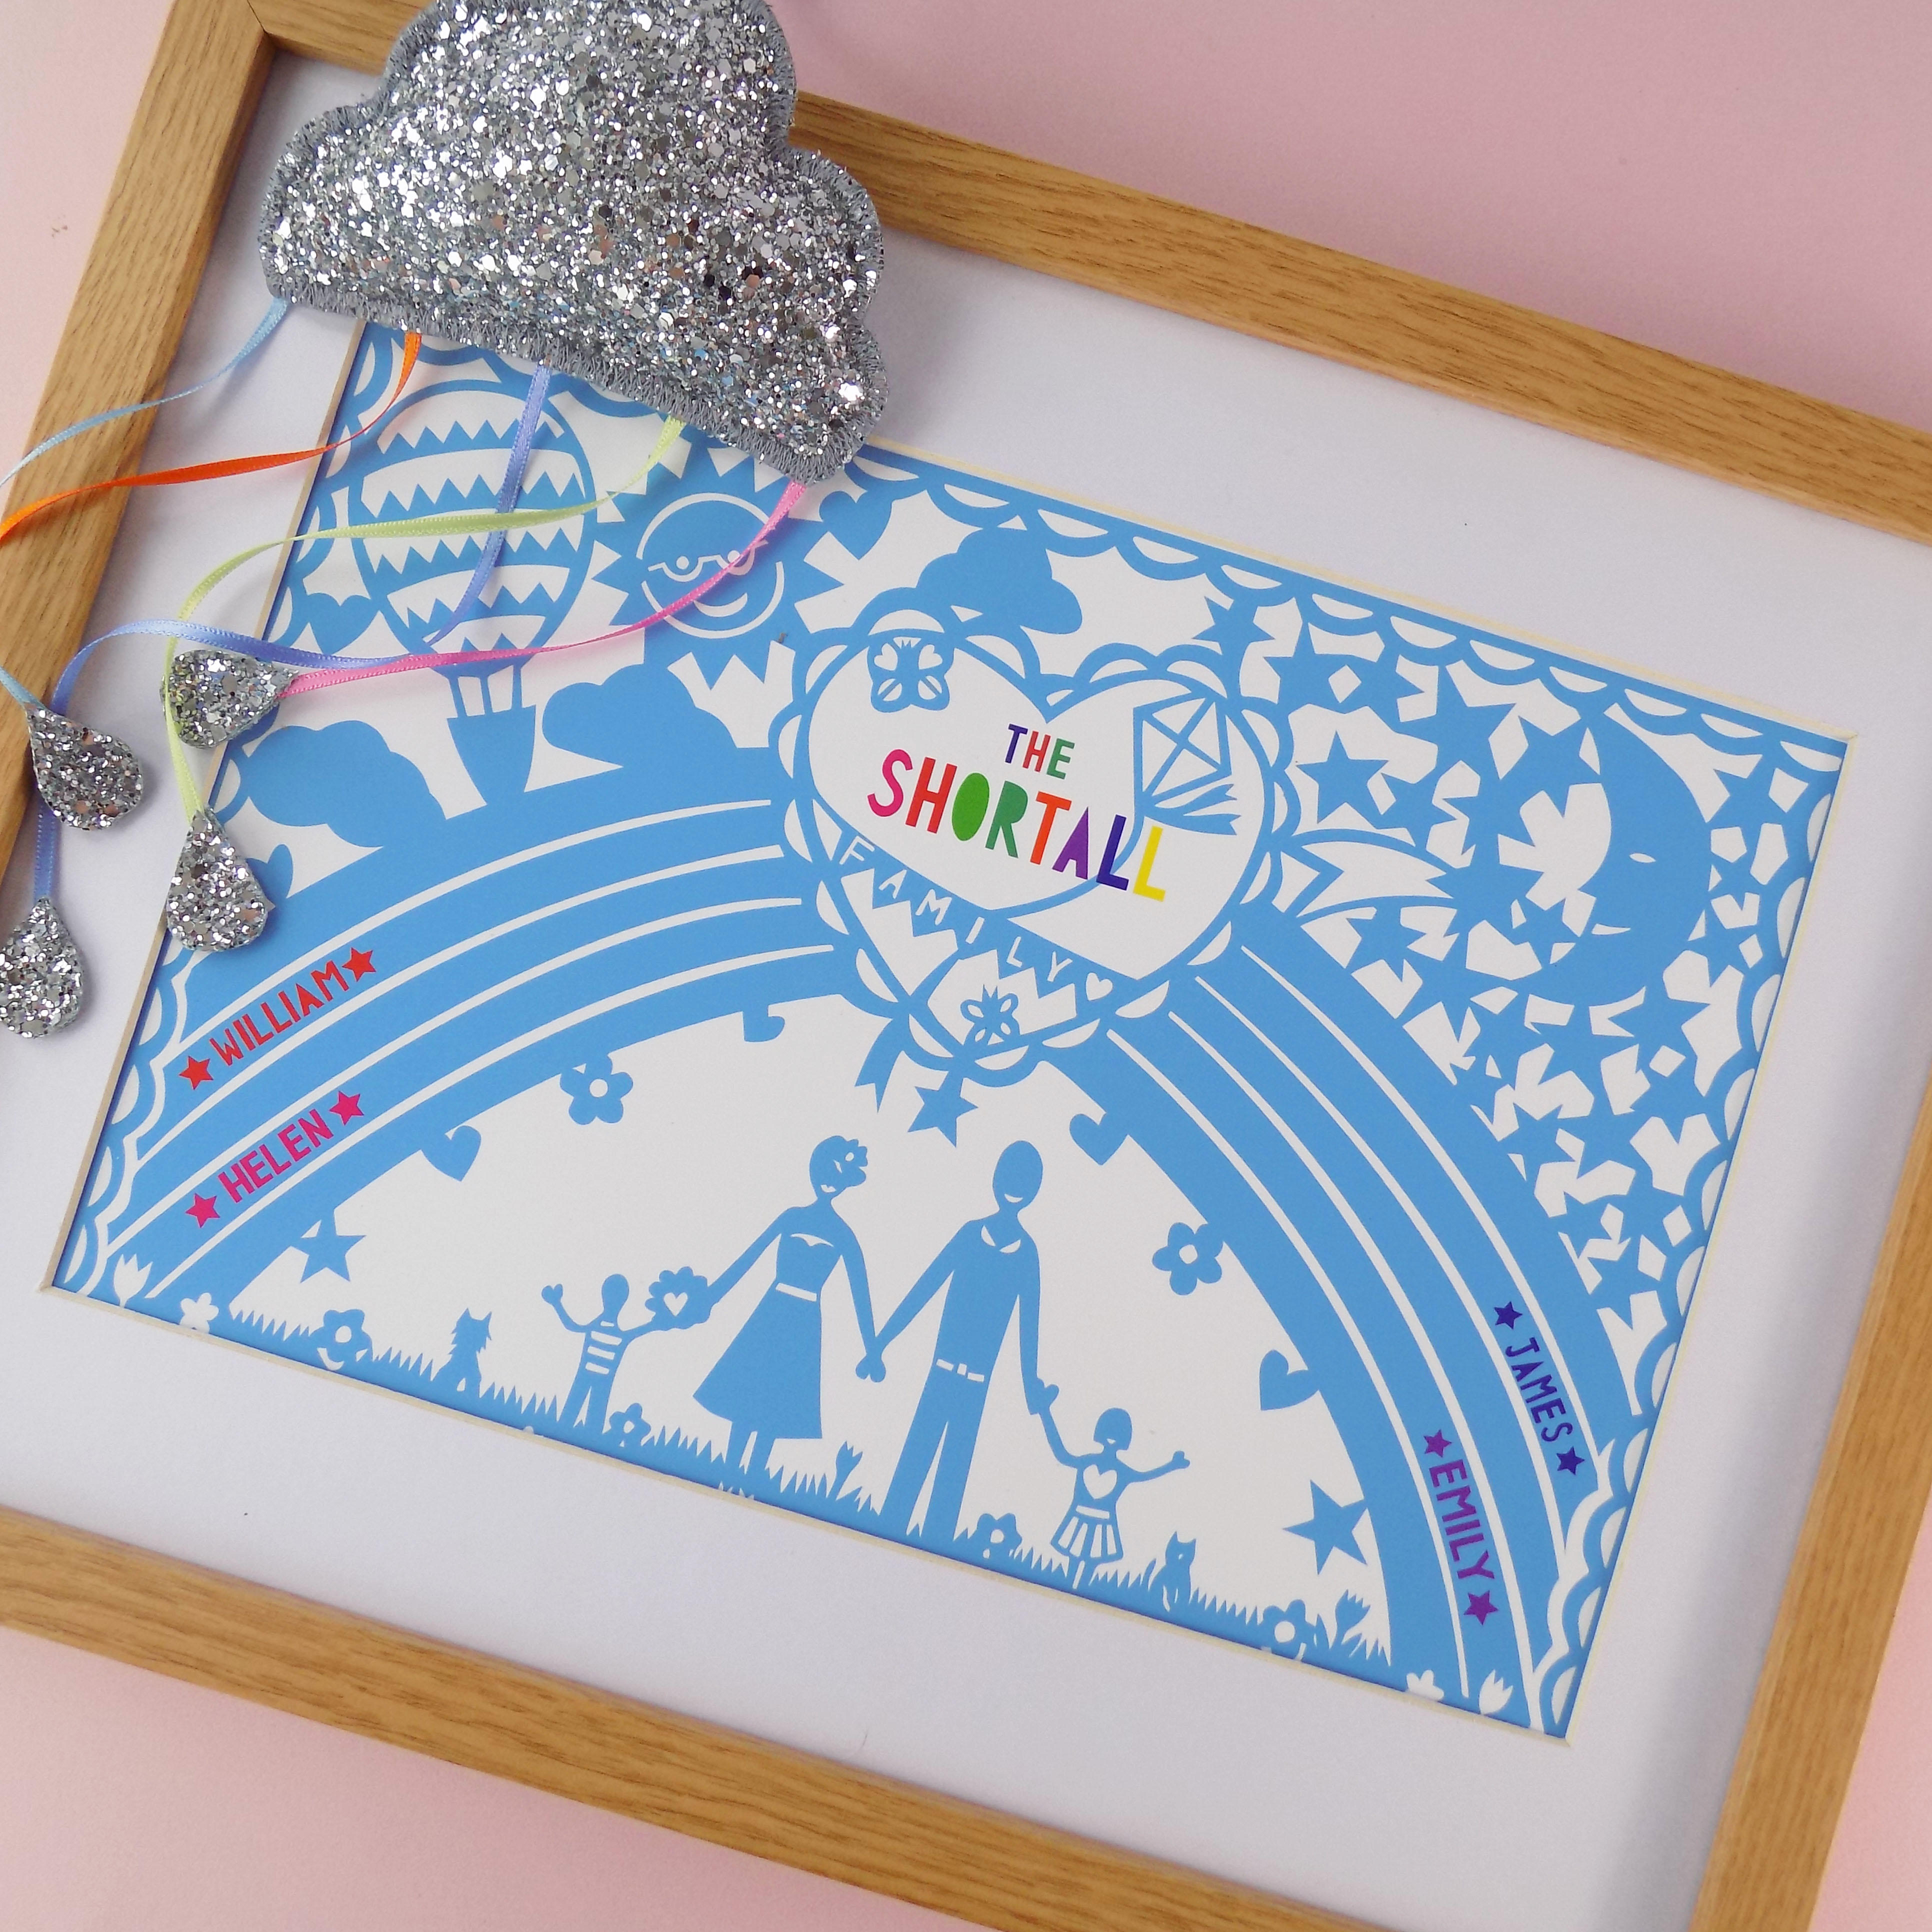 A close up of a printed personalised family rainbow.